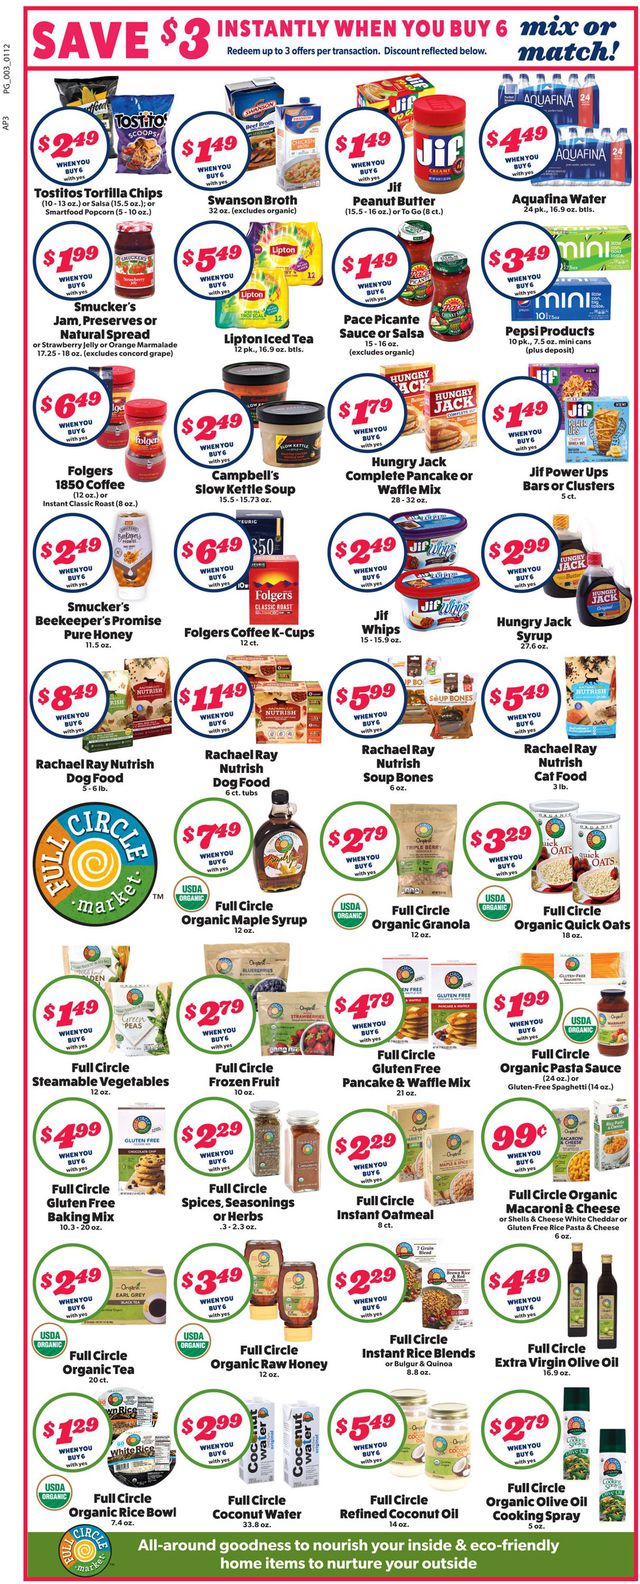 Family Fare Ad from 01/12/2020